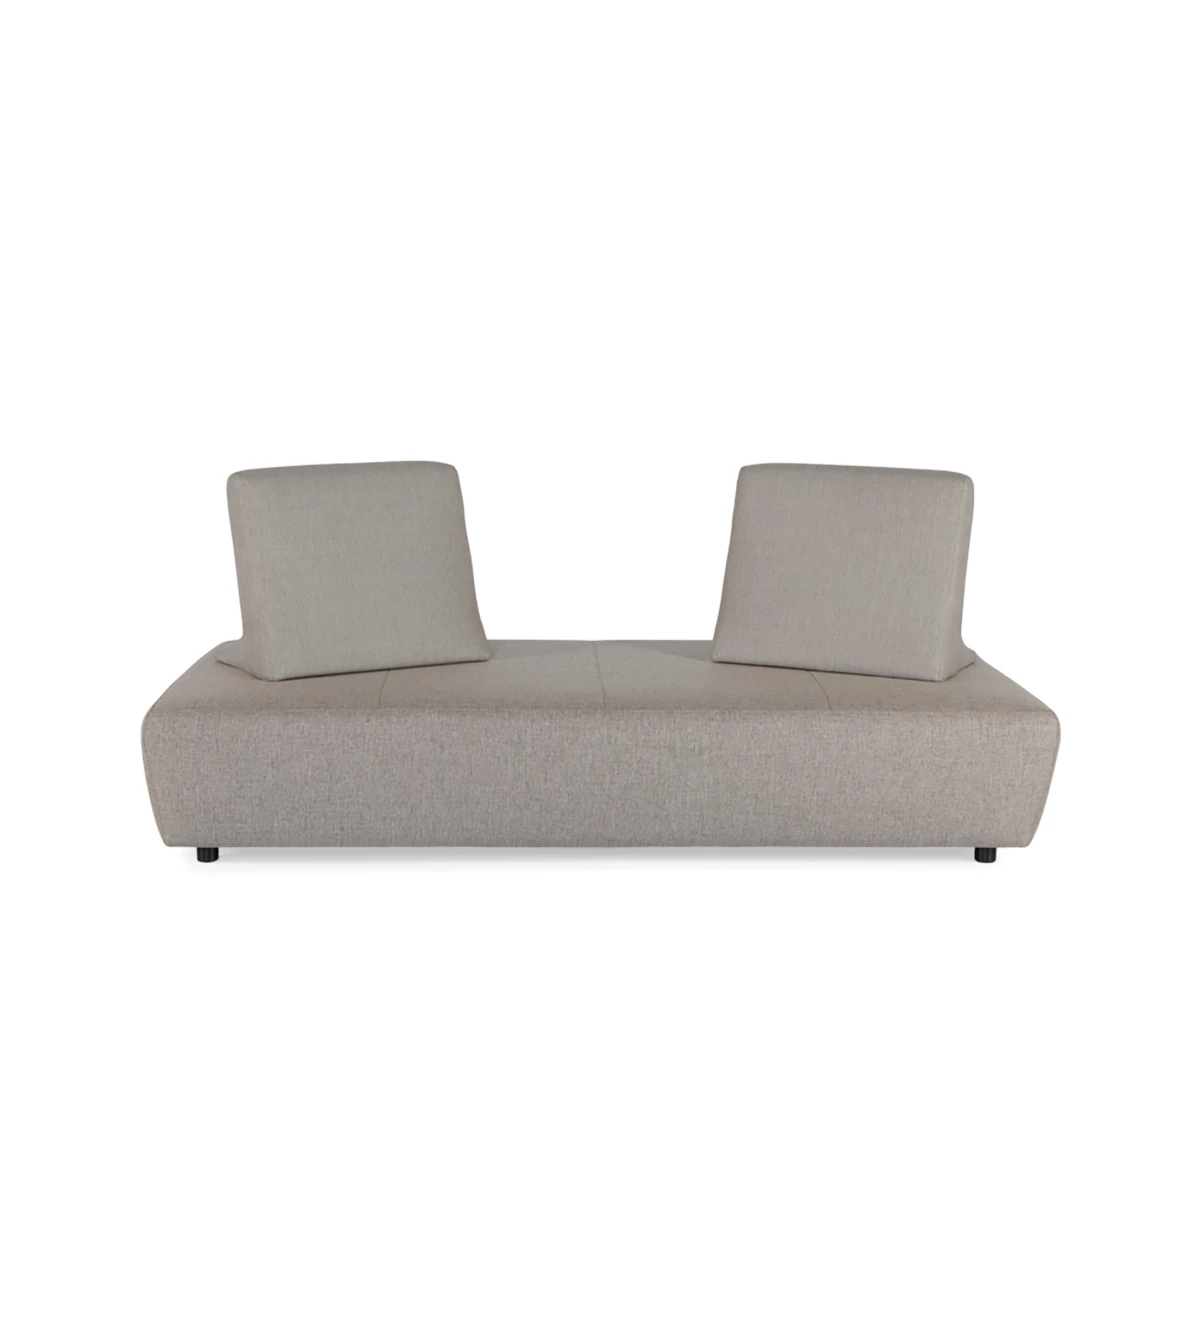 Sofa bed, upholstered in fabric, with removable back cushions.